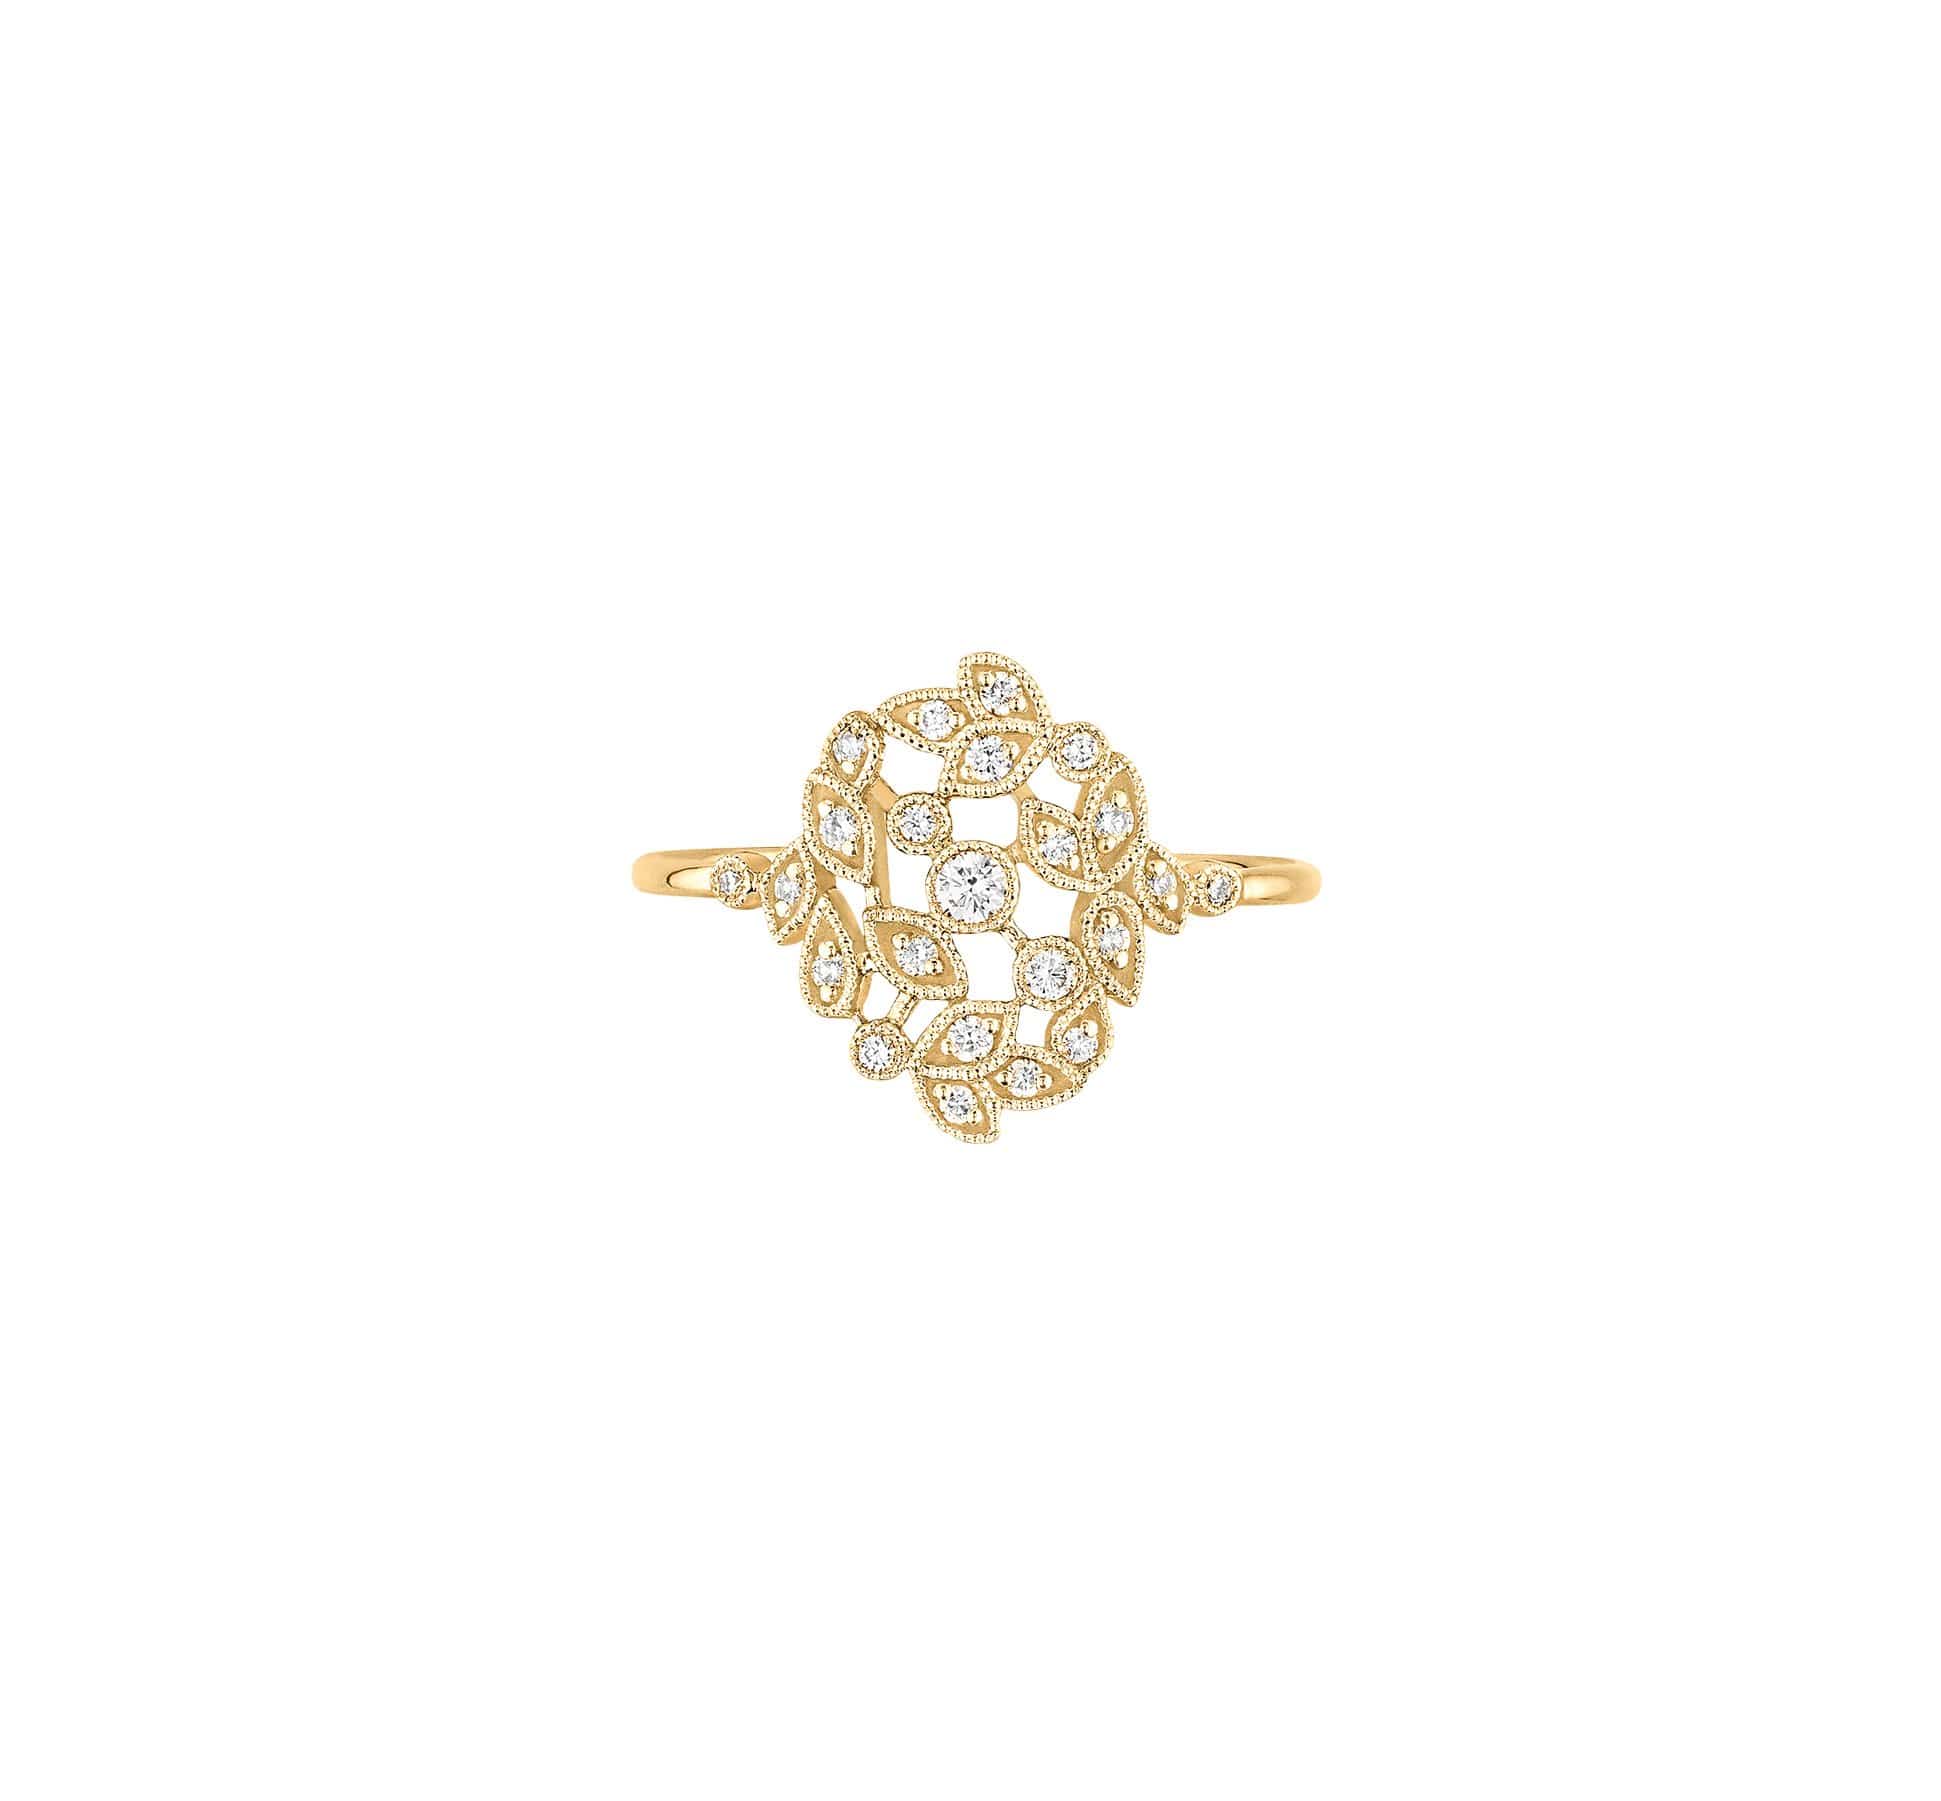 Bloom Gold and diamonds